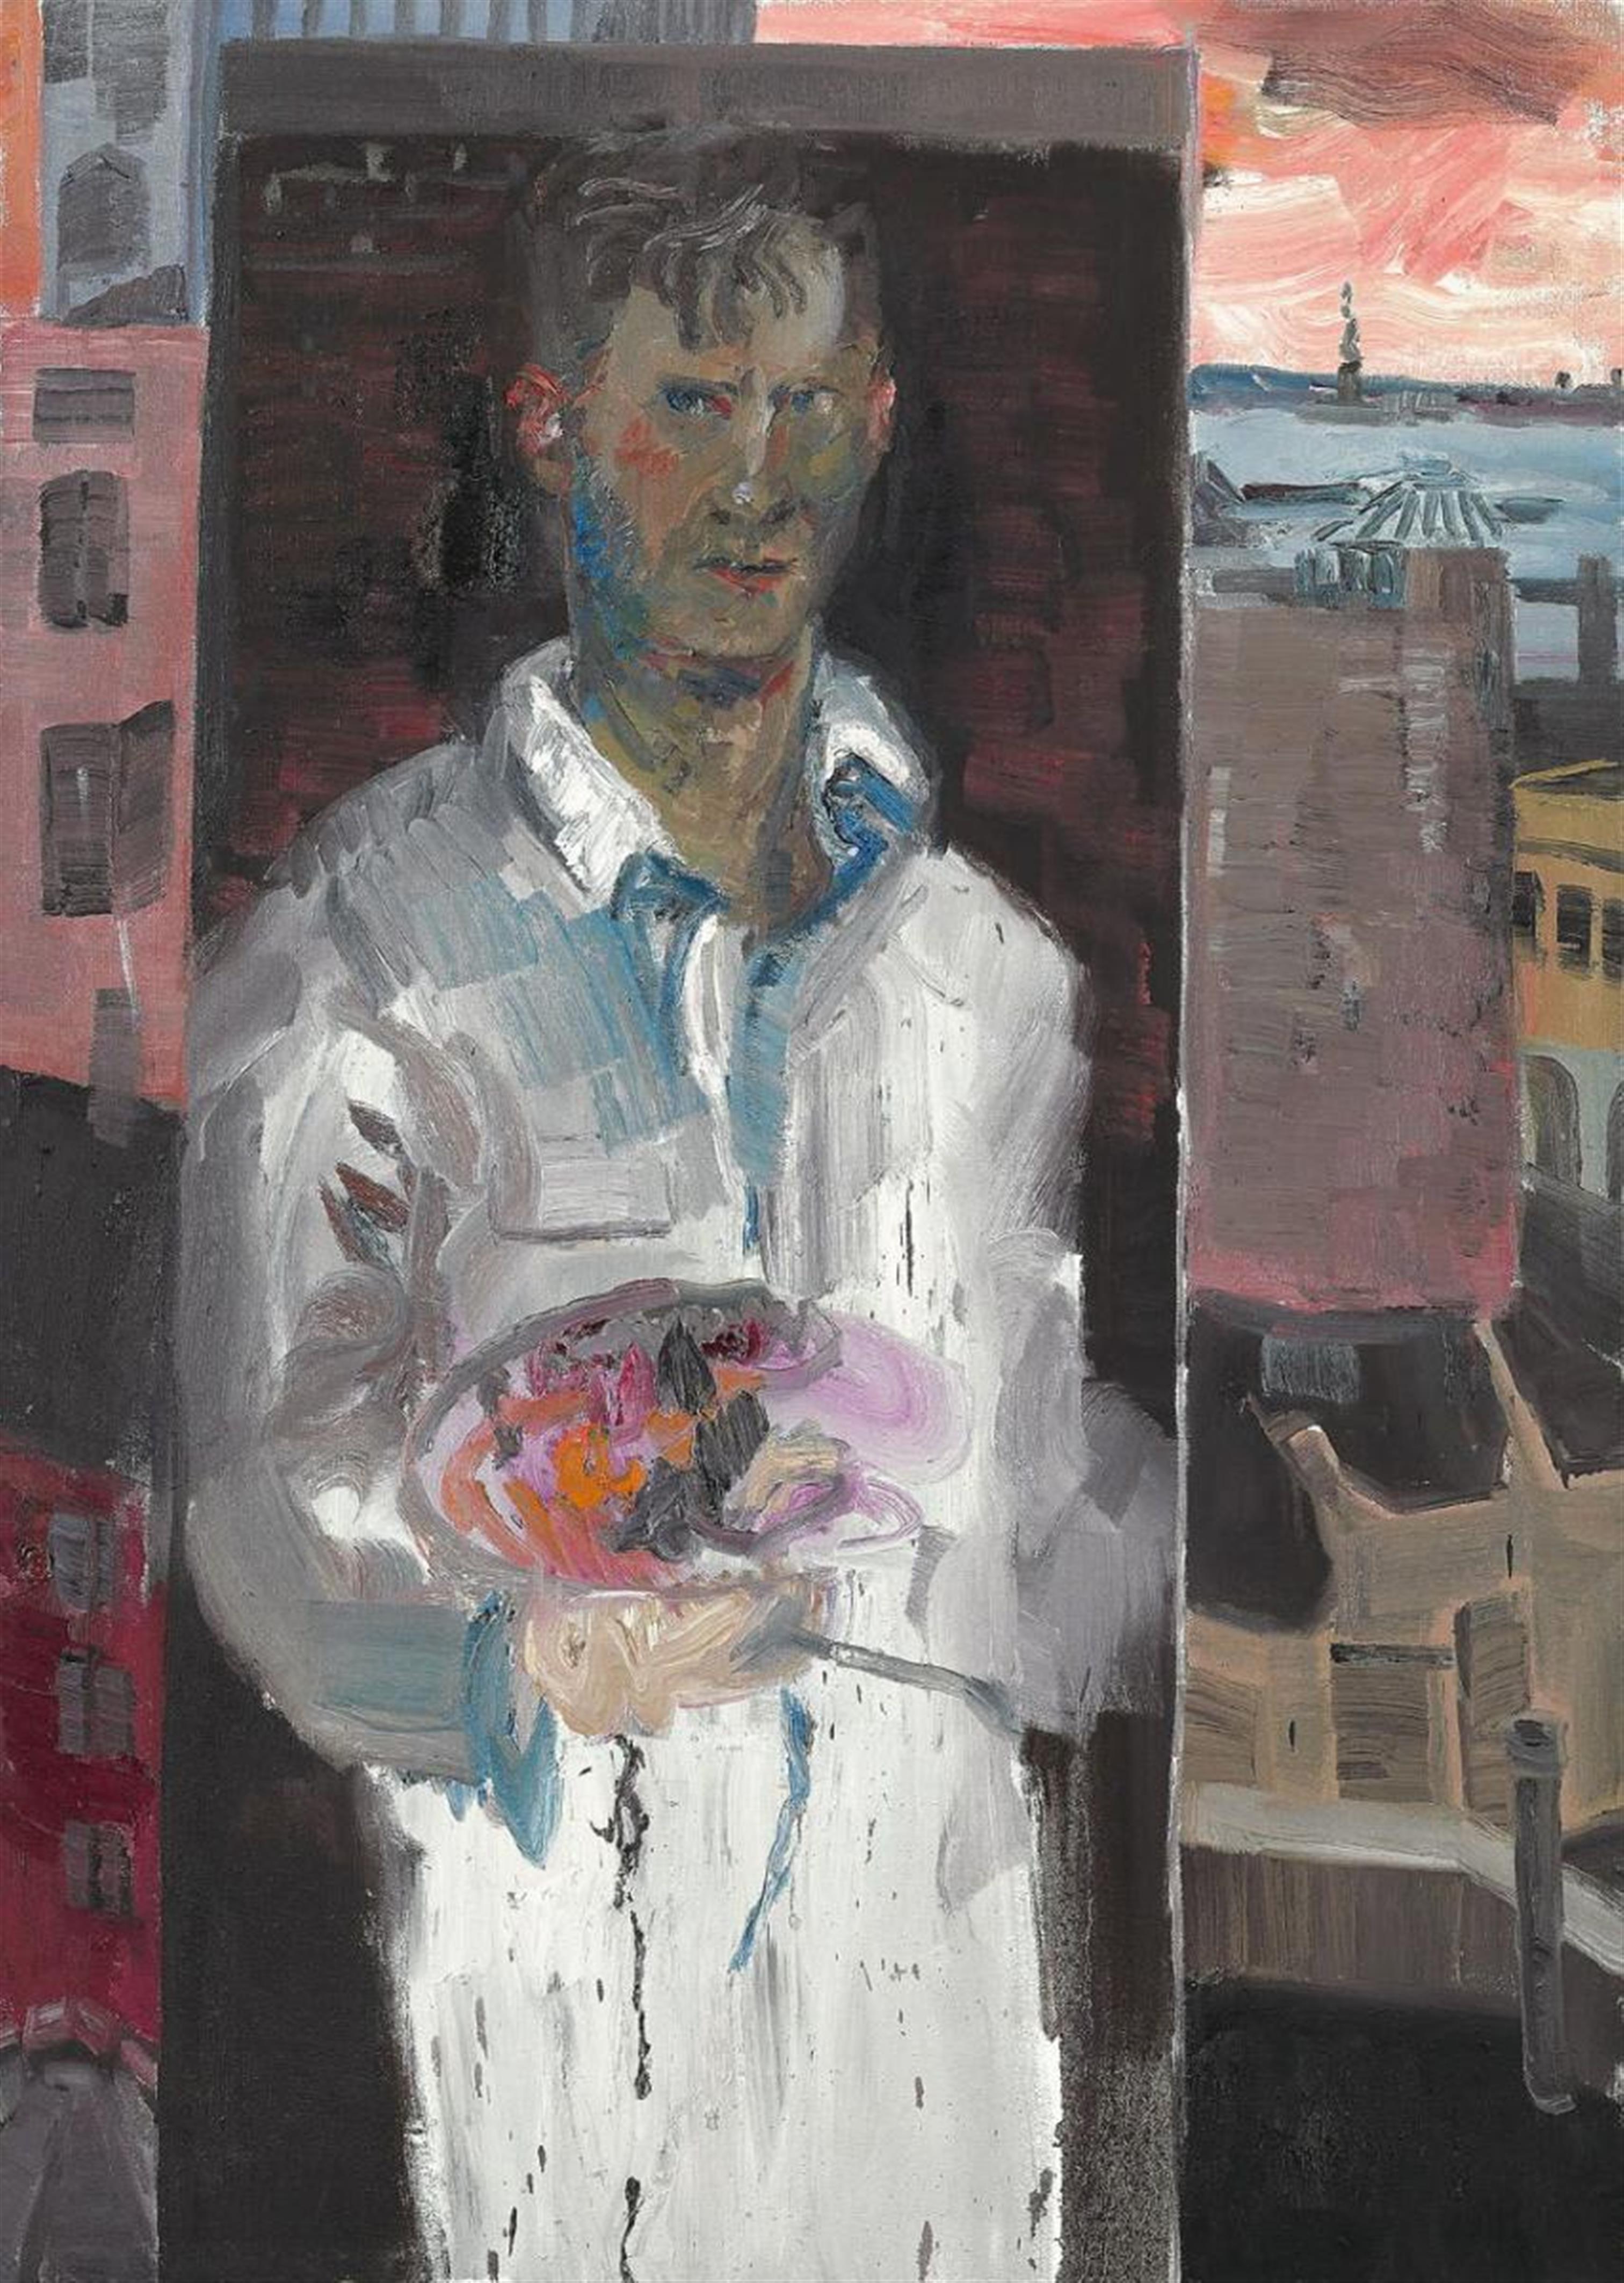 Rainer Fetting - Selfportrait at Greenwich 8th - image-1